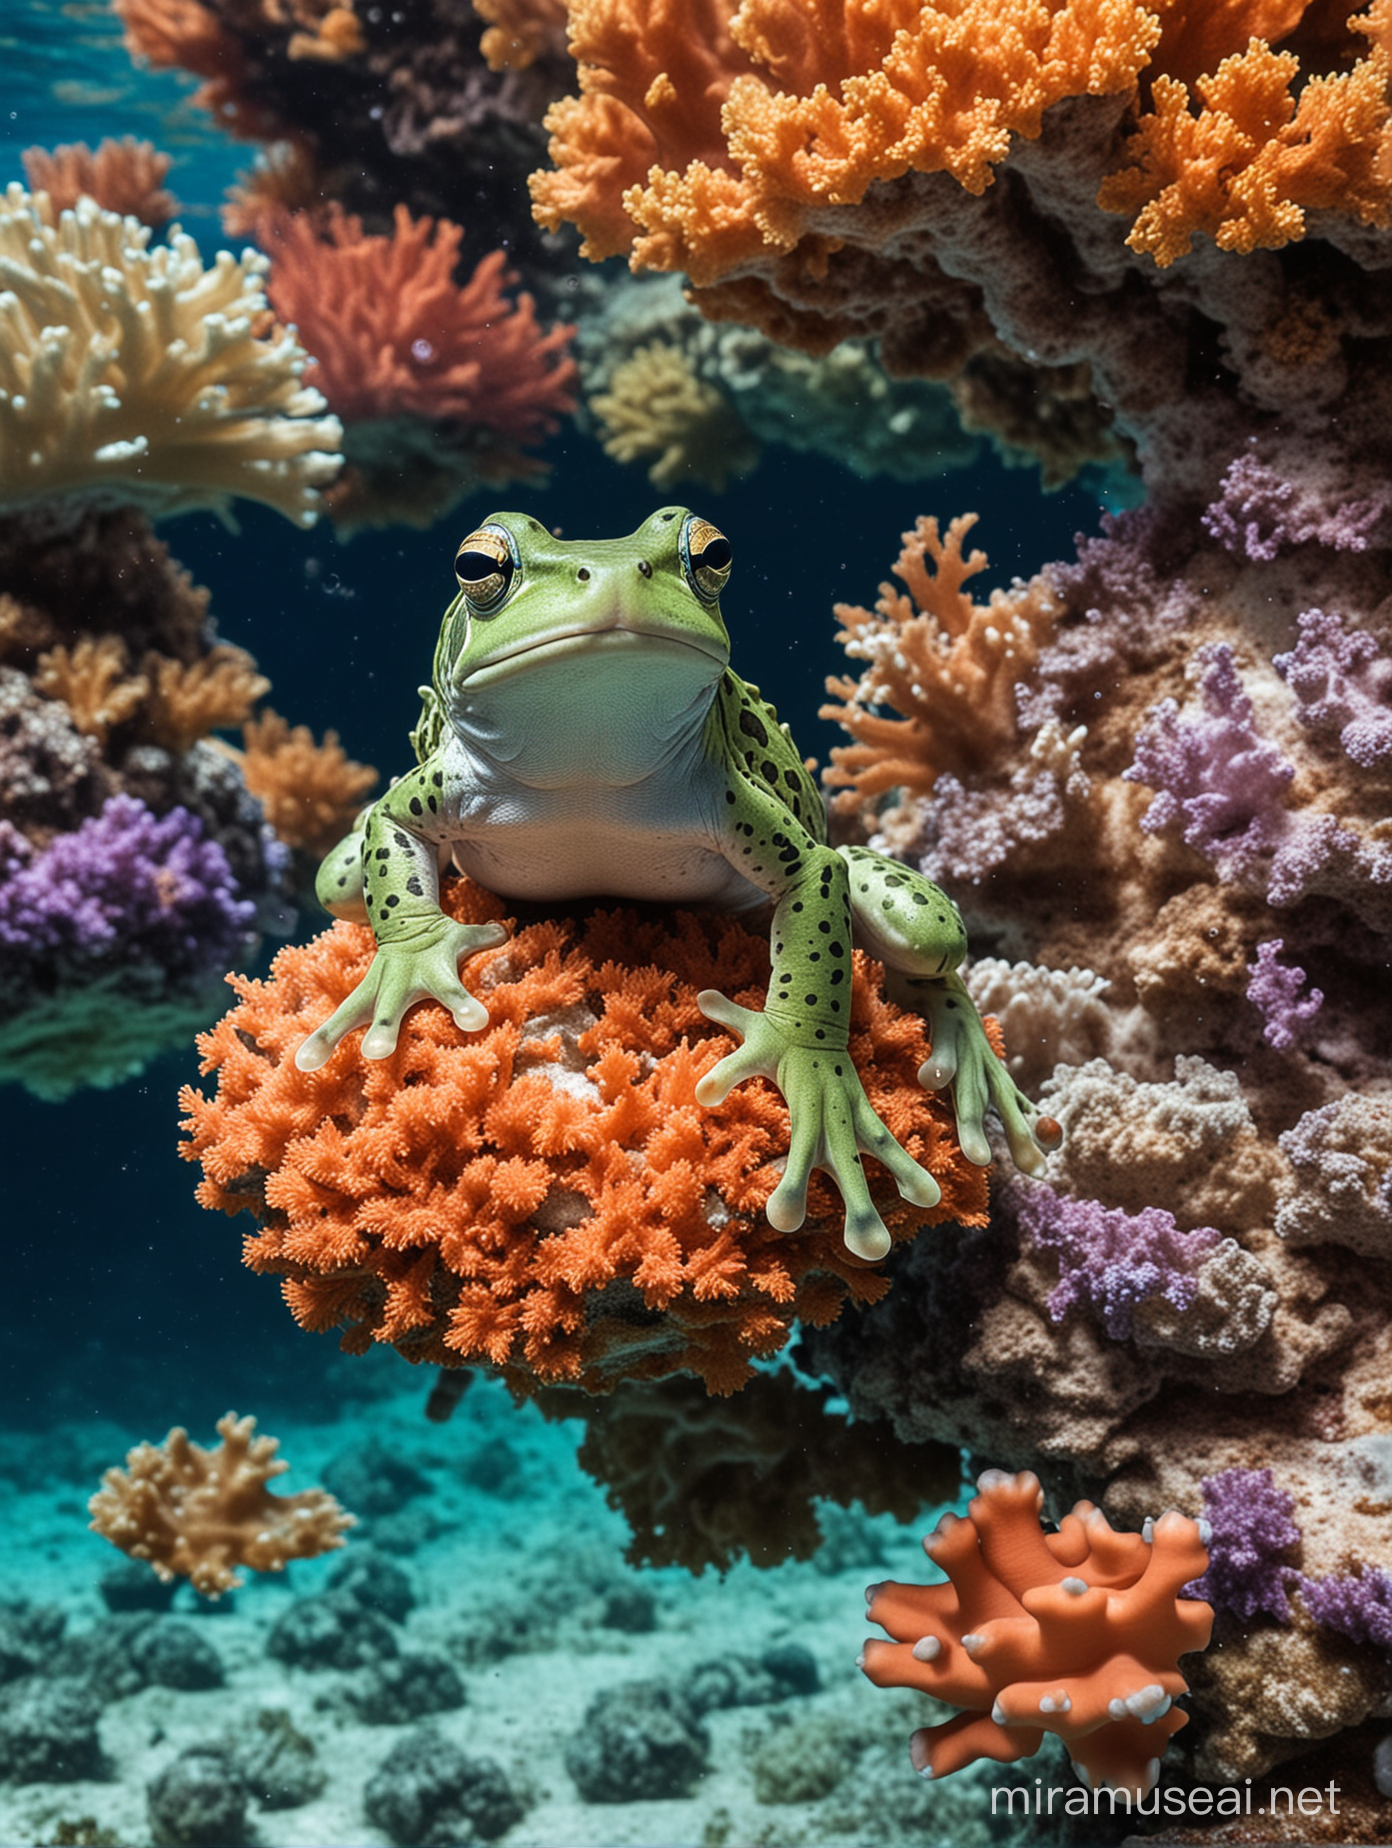 Sea frog swimming in the ocean in his coral reef home with his sea creature friends